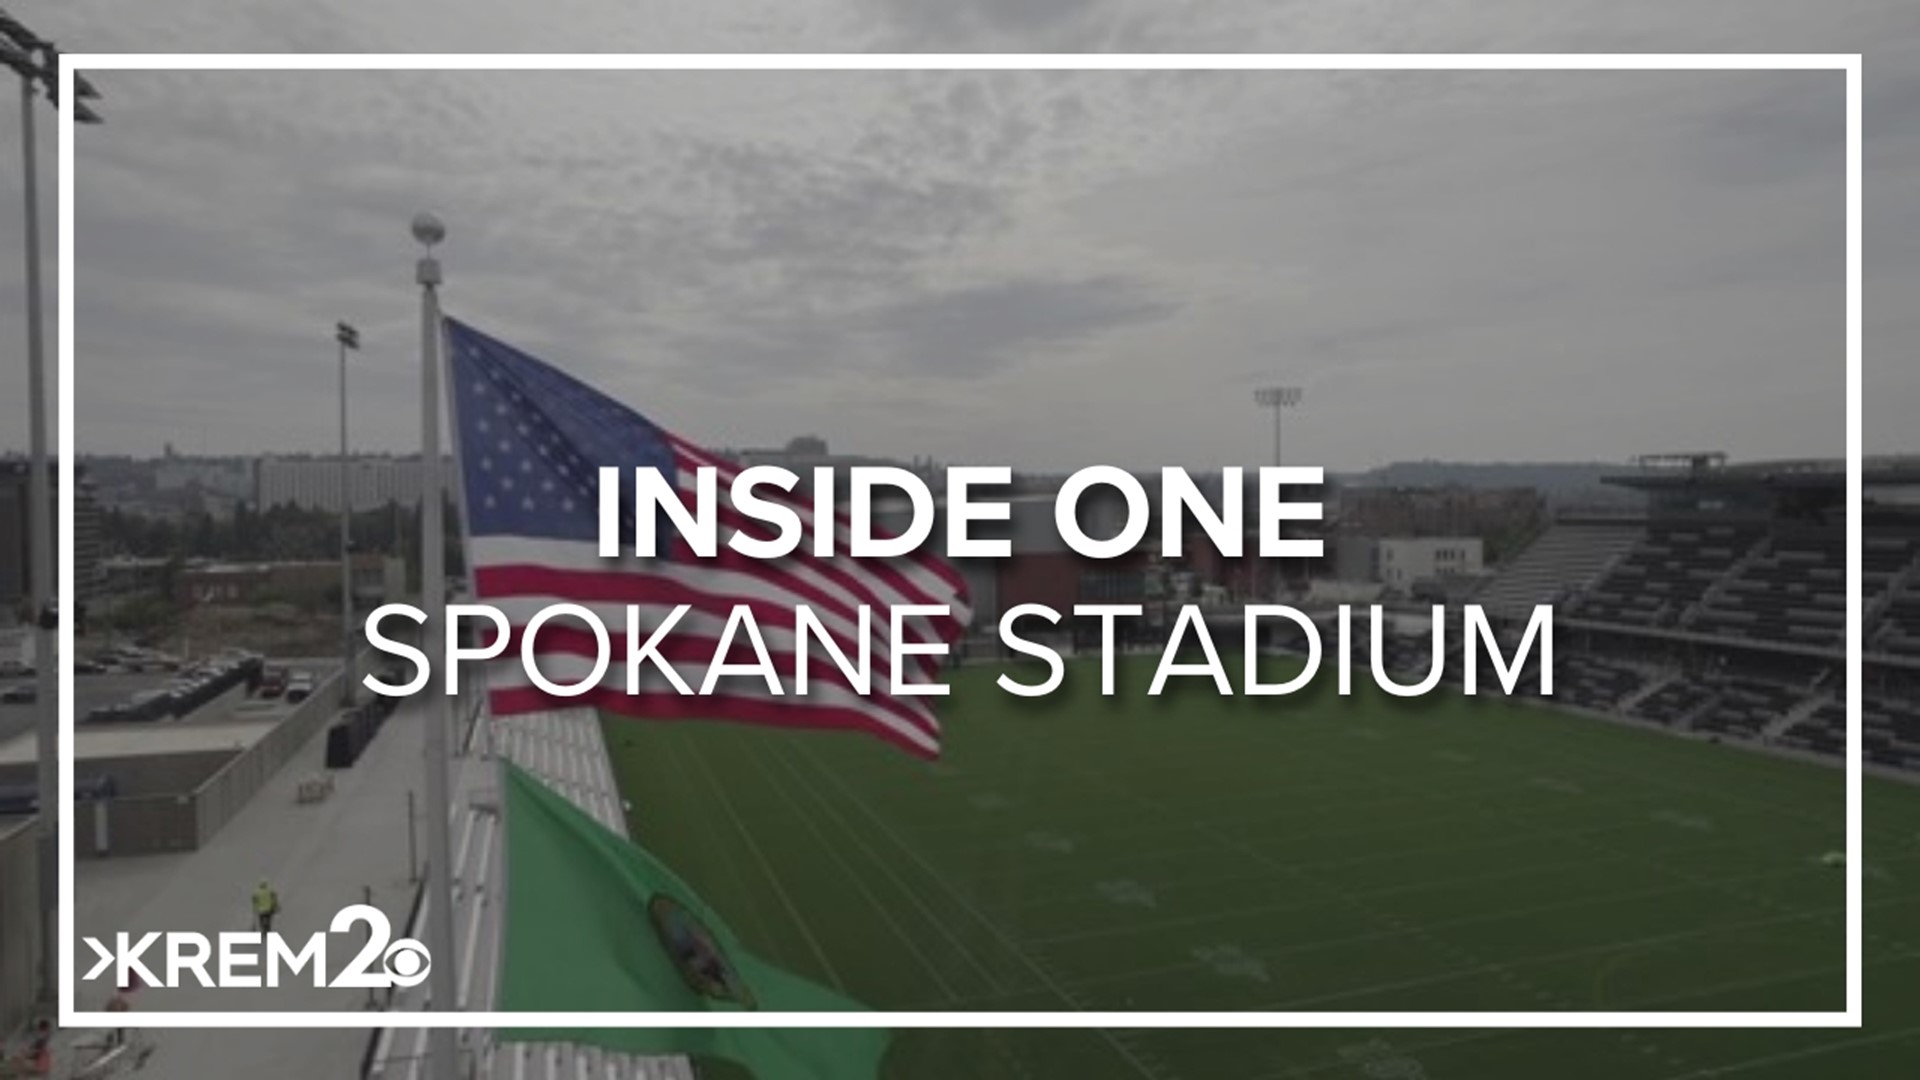 One Spokane Stadium is almost ready to host its first high school football game this week.